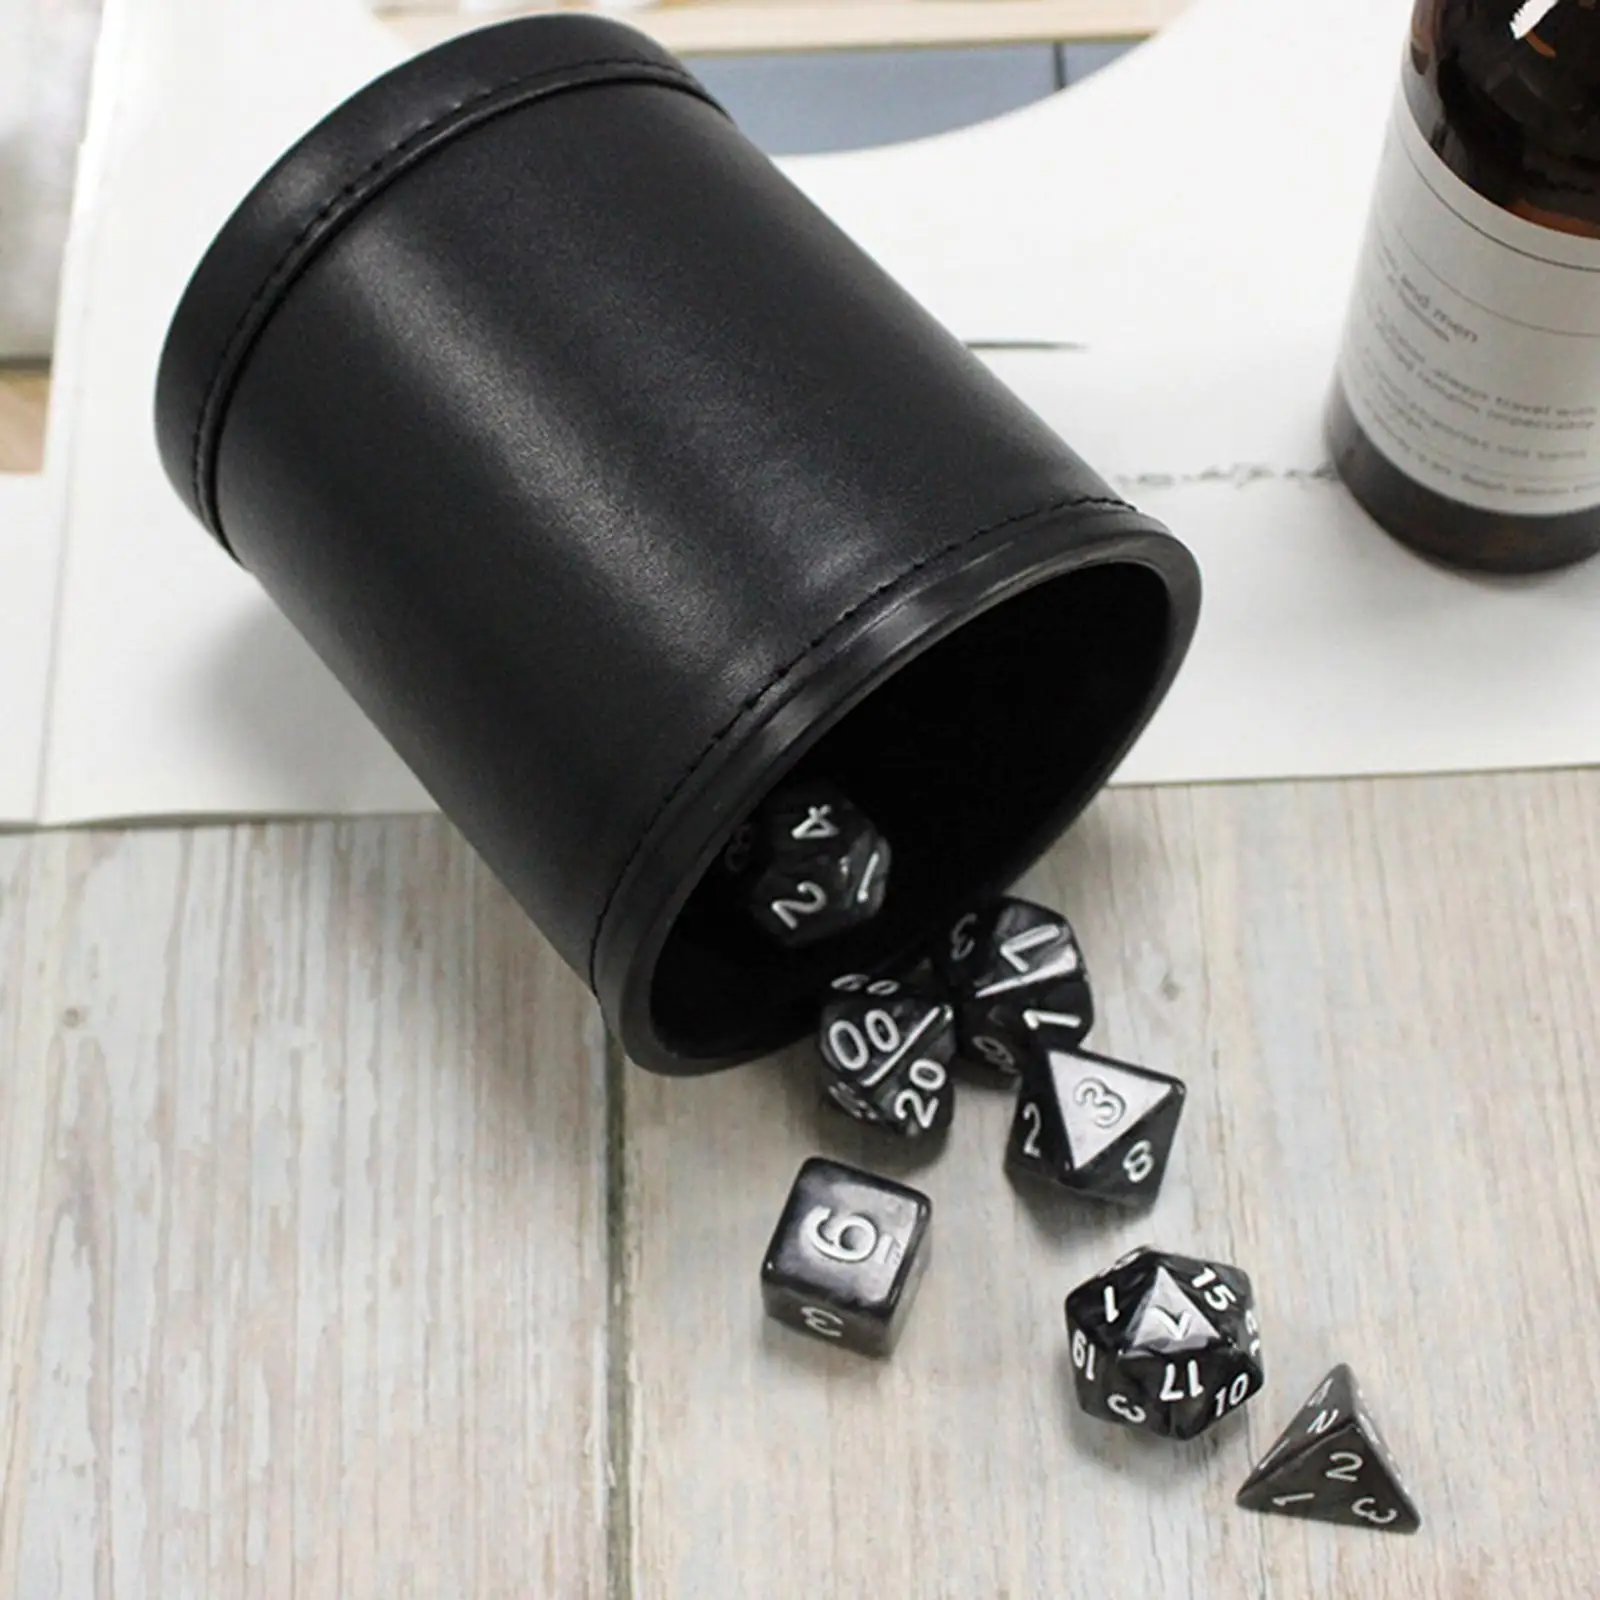 Protable Dice Cup Dice Game Supplies Professional Entertainment Leather Dice Box Dice Decider Dice Shaker for Club Bar Ktv Party